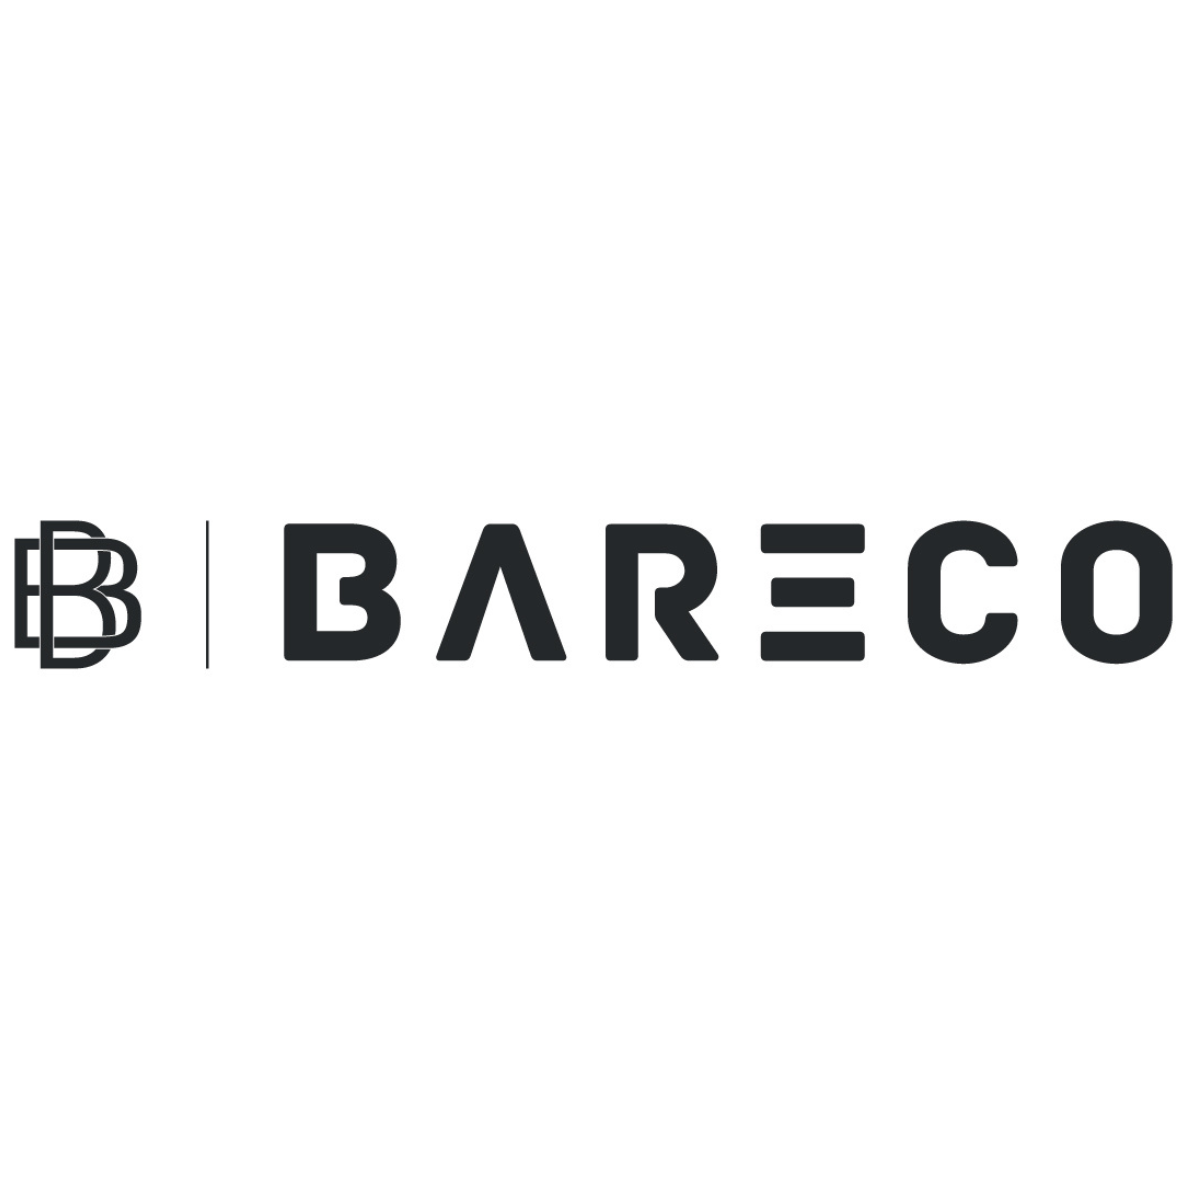 BARECO | Business, Management & Leadership Consulting Firm in India